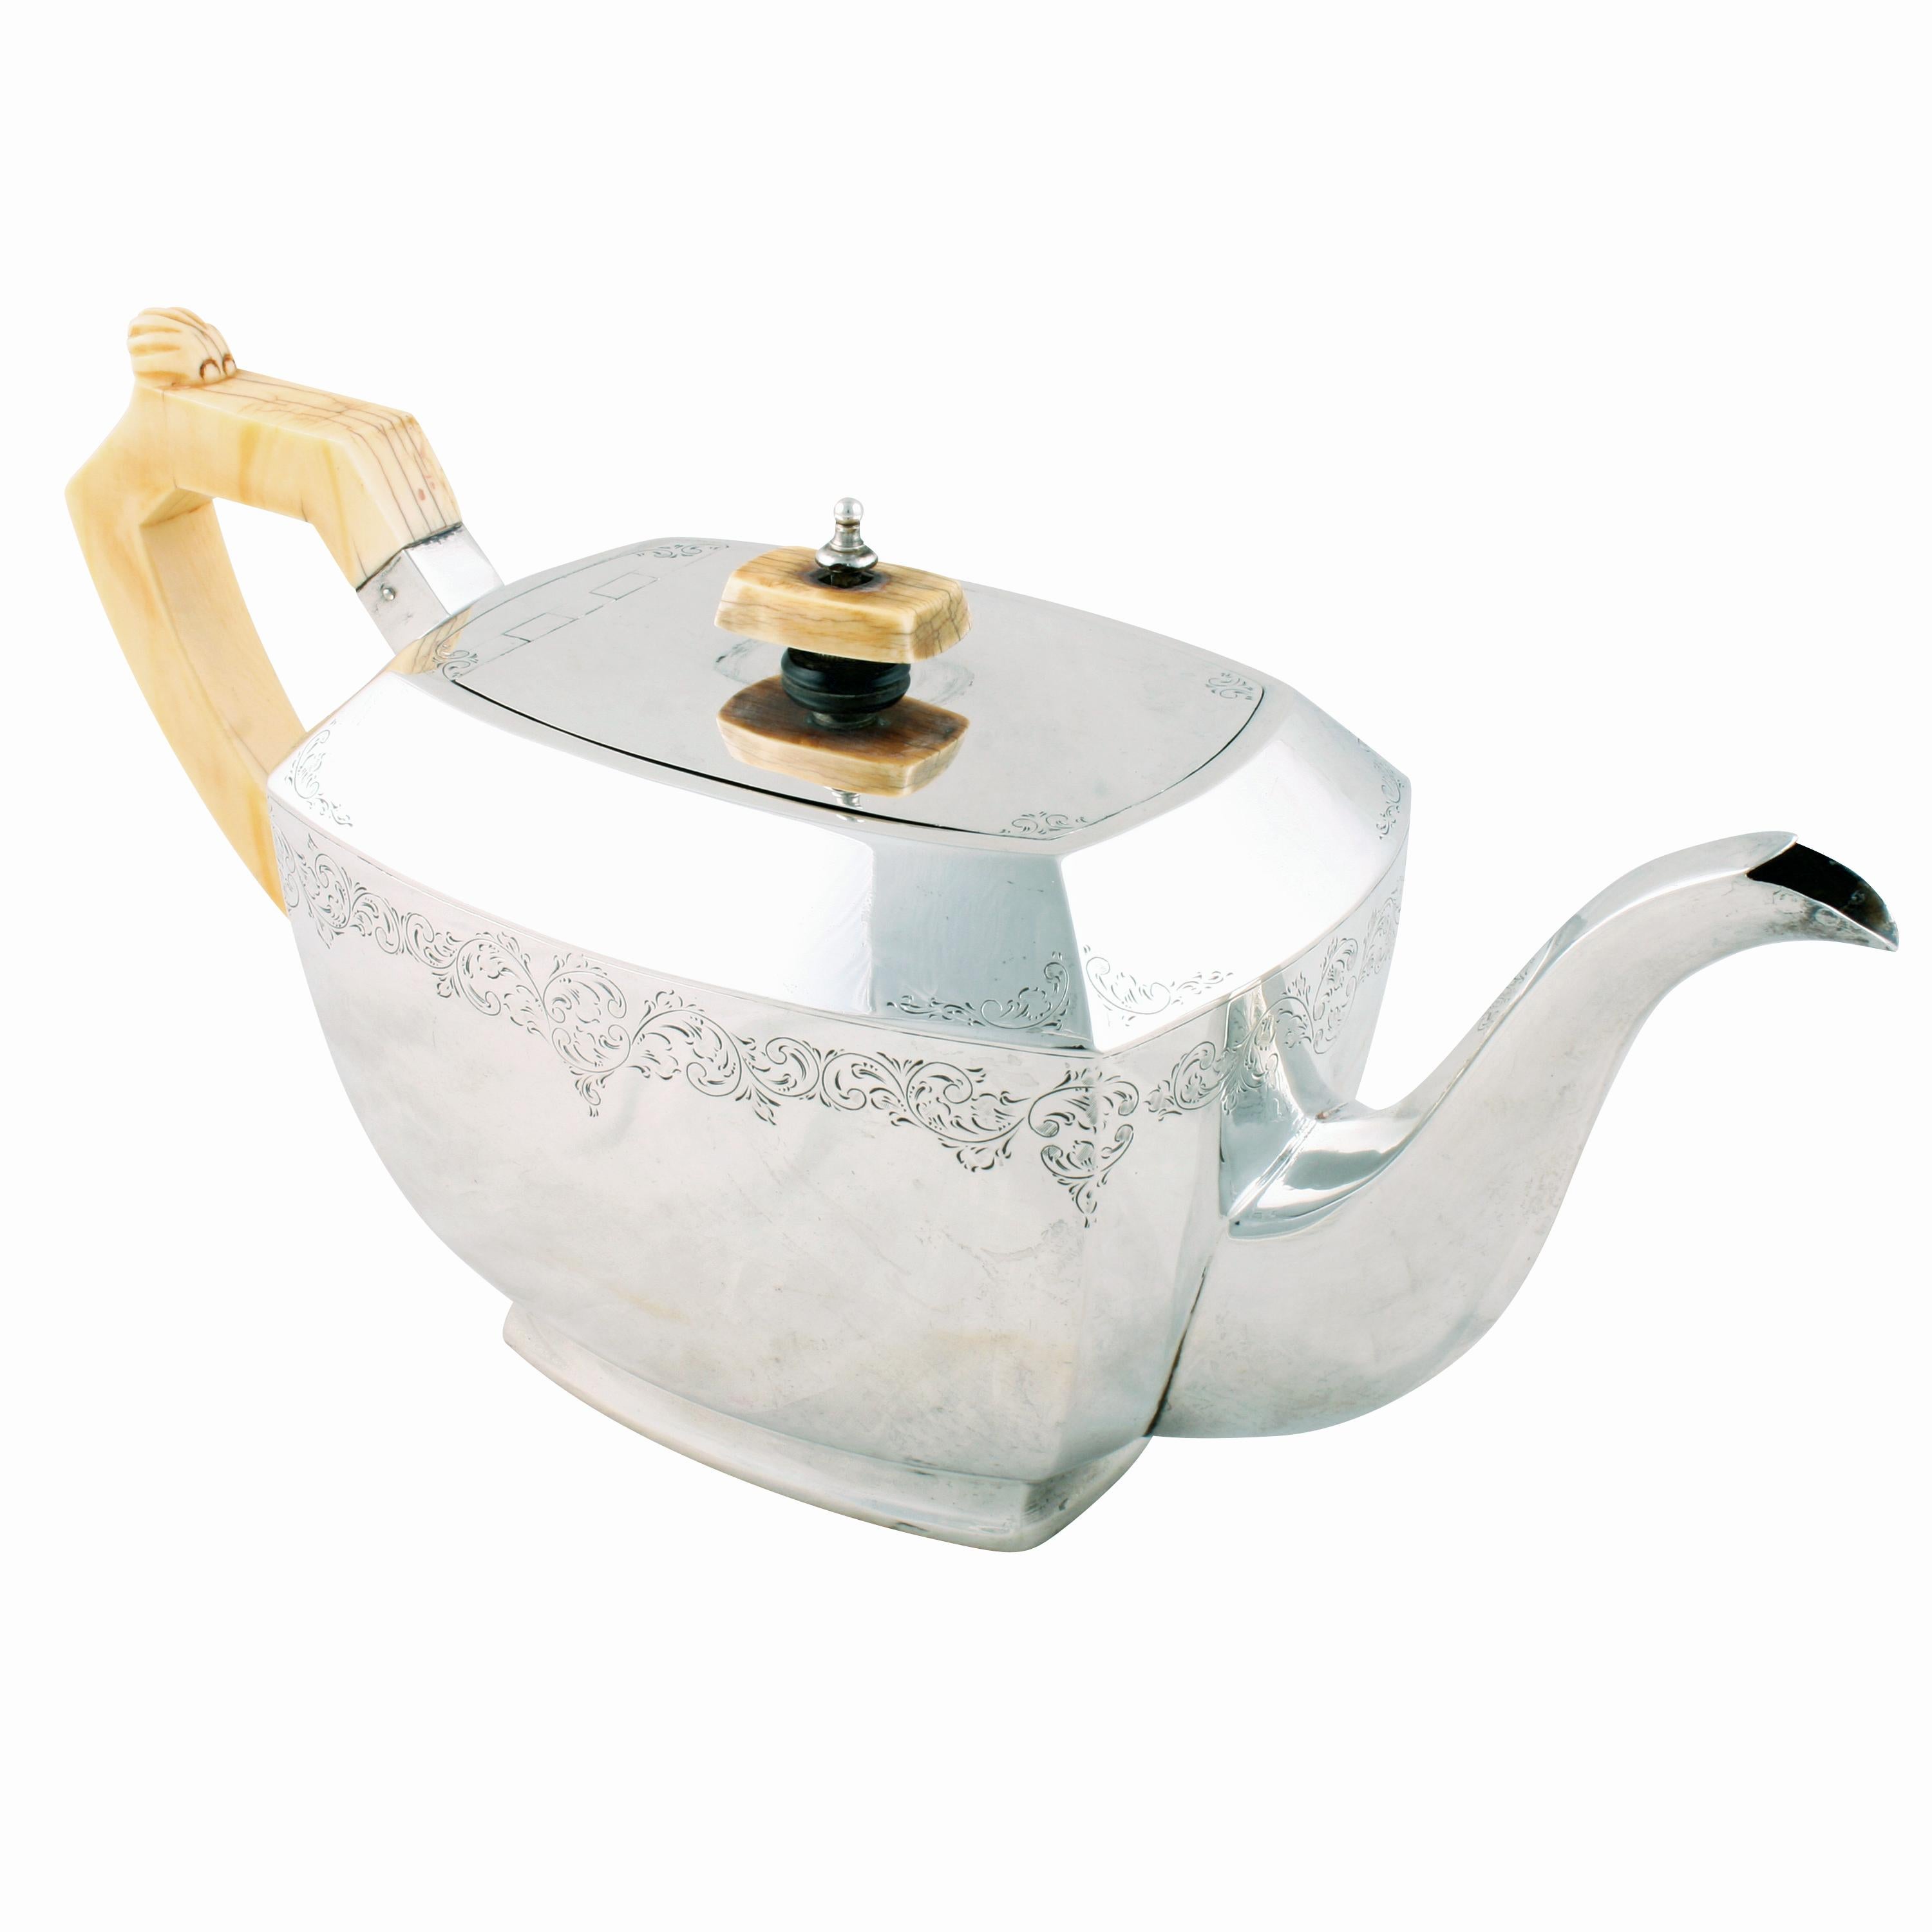 A 20th century George VI sterling silver teapot.

The teapot has sterling silver hall marks for Edinburgh, the year 1938 and a maker's mark for Henry Tatton & Son.

The teapot is in an Art Deco design with a carved ivory handle and a knob for